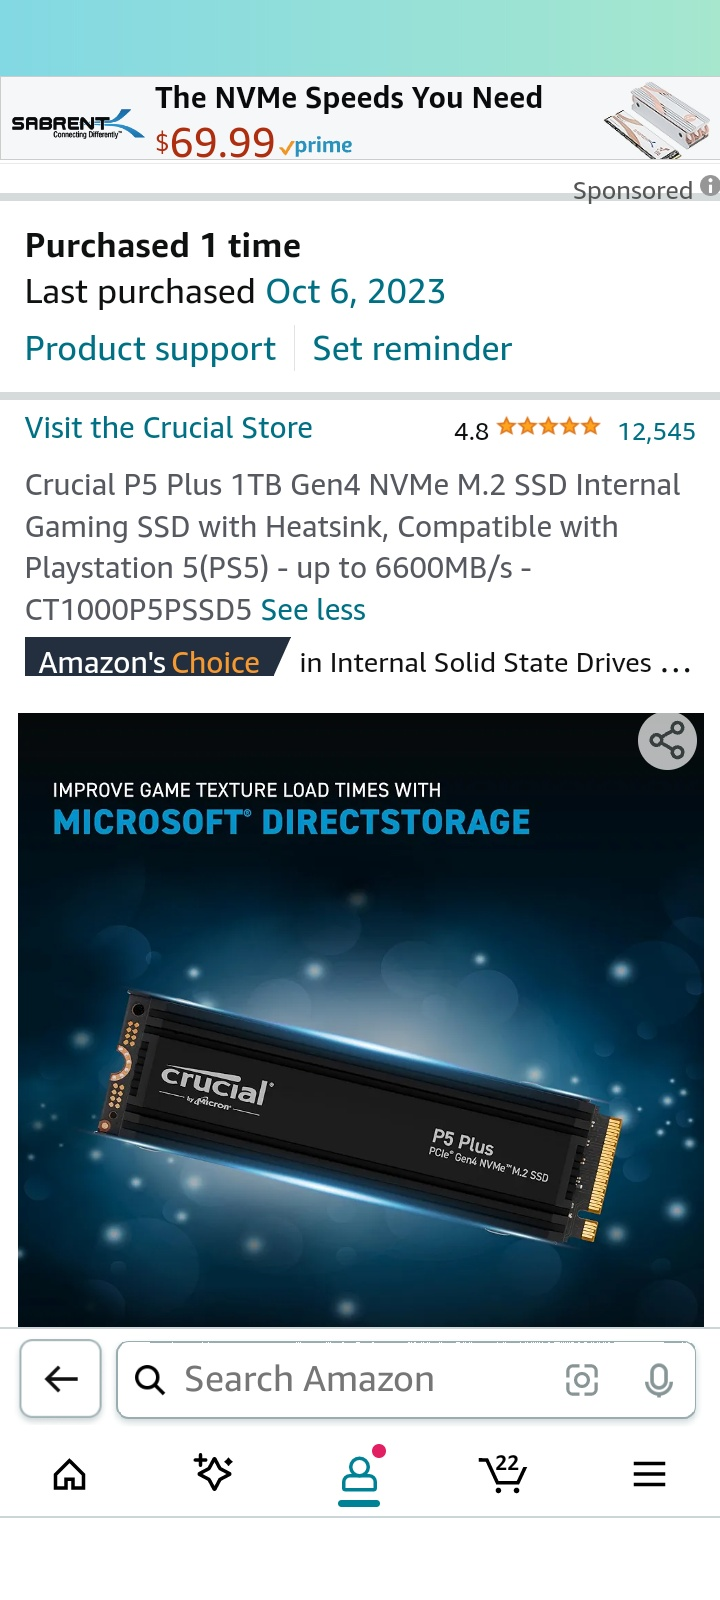 How to upgrade a PlayStation 5 SSD and install Crucial's P5 Plus